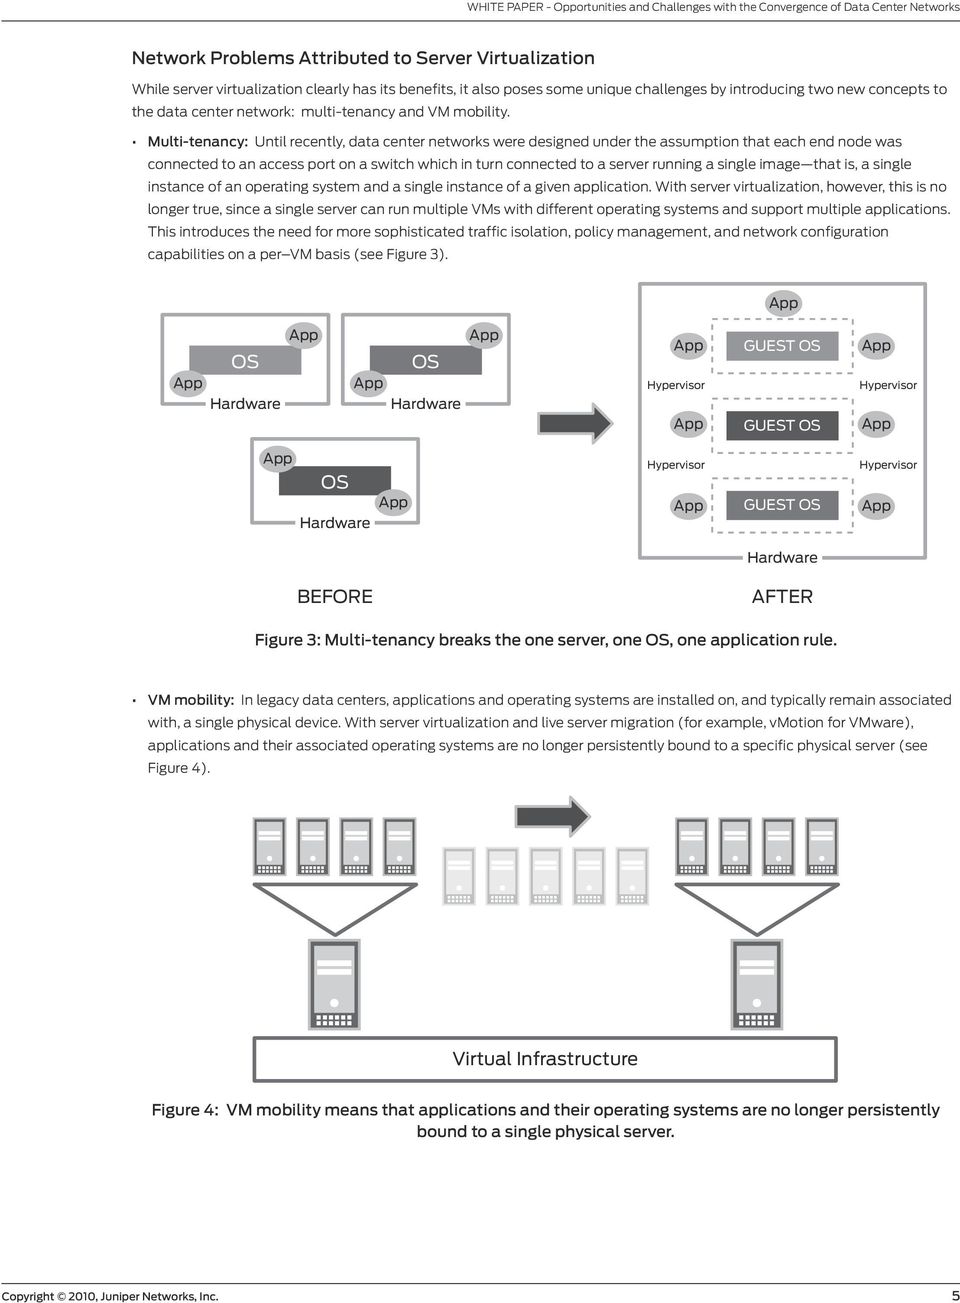 Multi-tenancy: Until recently, data center networks were designed under the assumption that each end node was connected to an access port on a switch which in turn connected to a server running a